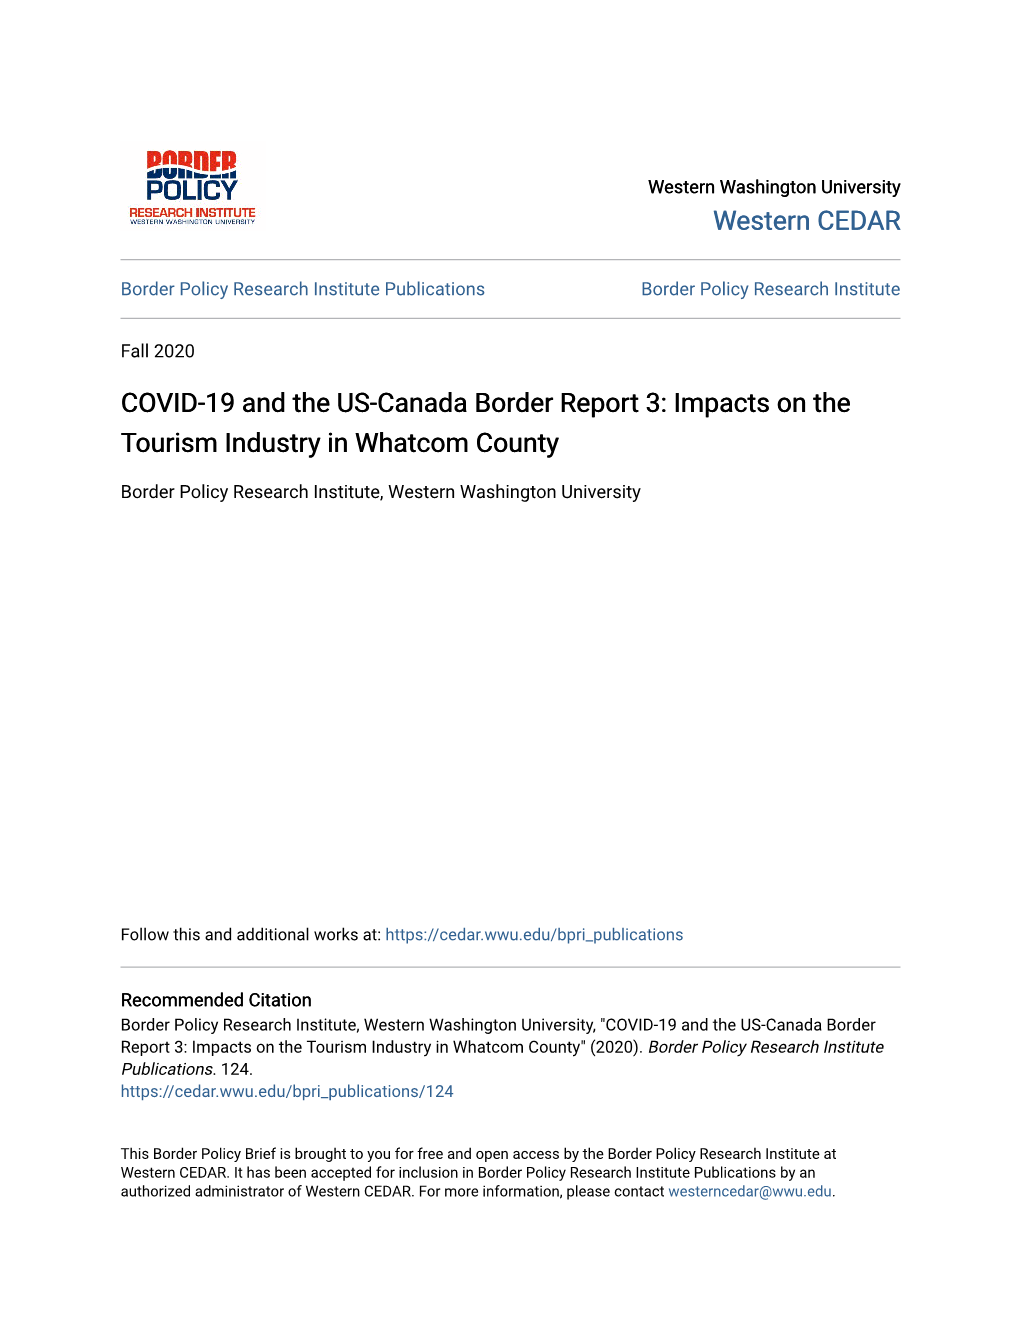 COVID-19 and the US-Canada Border Report 3: Impacts on the Tourism Industry in Whatcom County